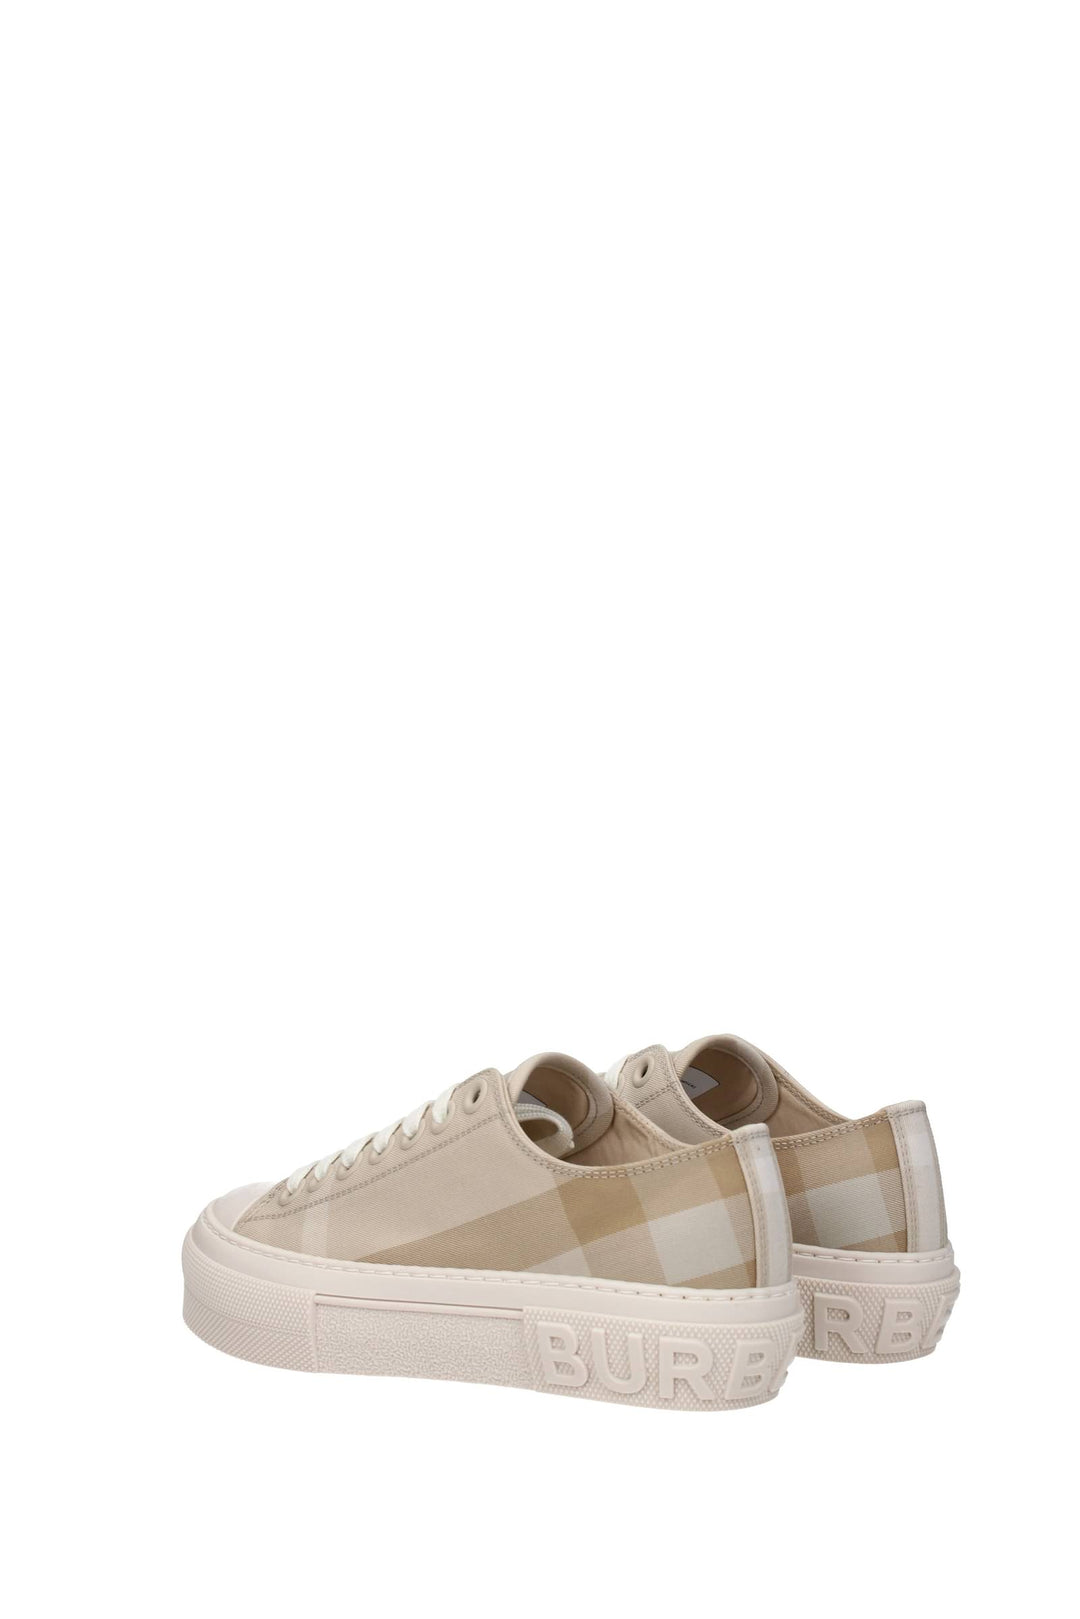 Sneakers Tessuto Beige - Burberry - Donna